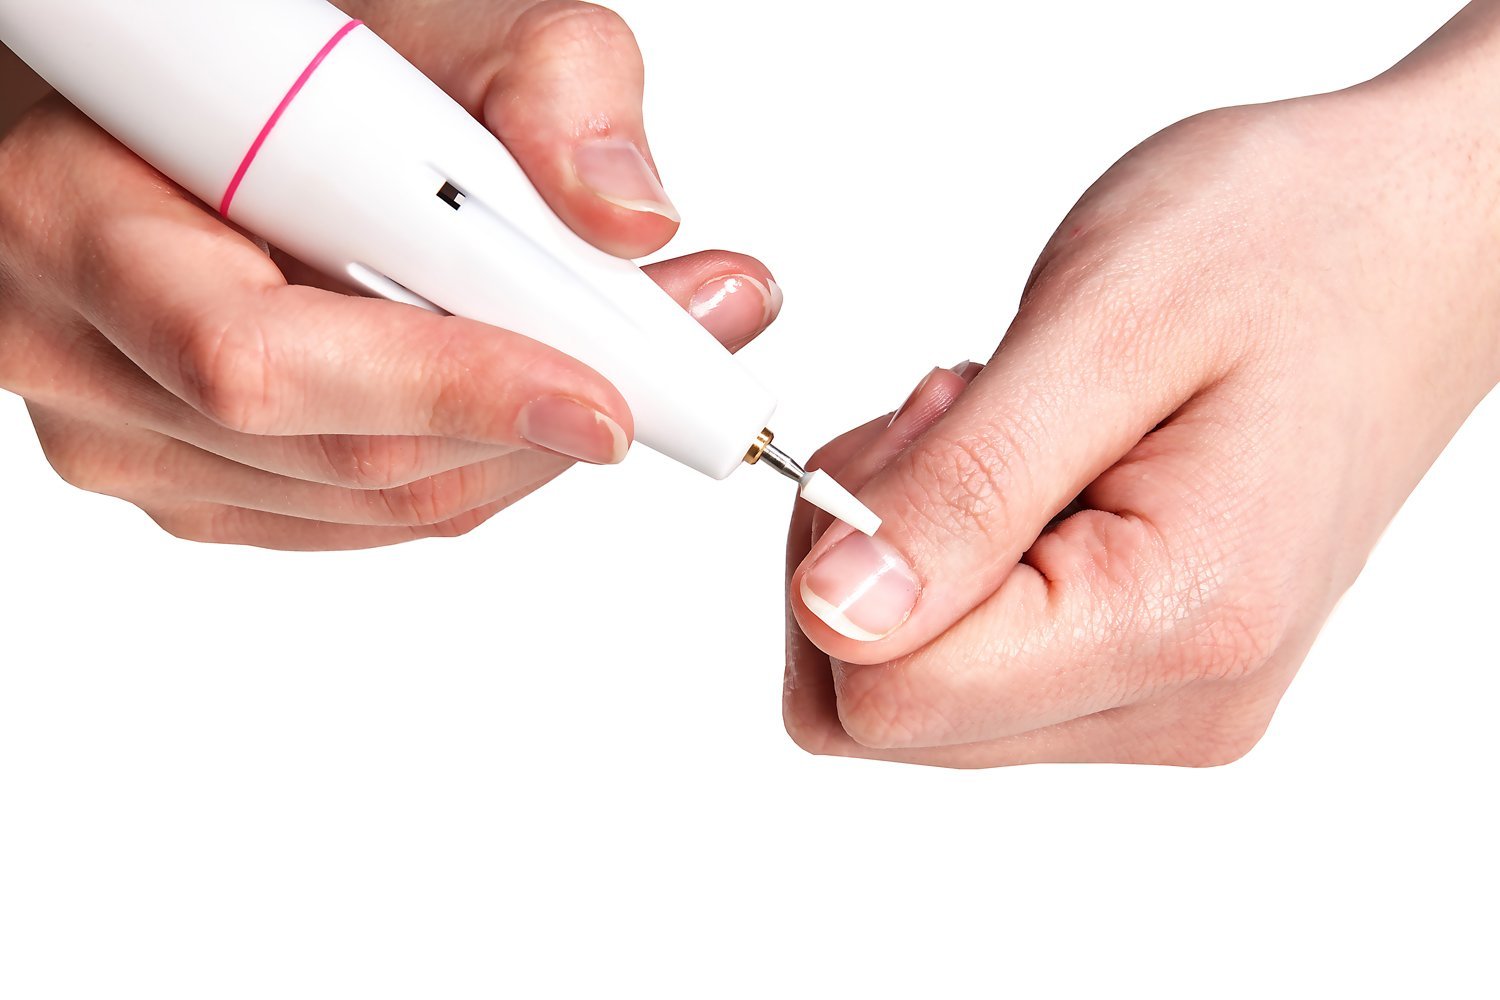 Ergonomic, low-vibration plastic handpiece of the Promed The File 502 nail file (approx. 75g).